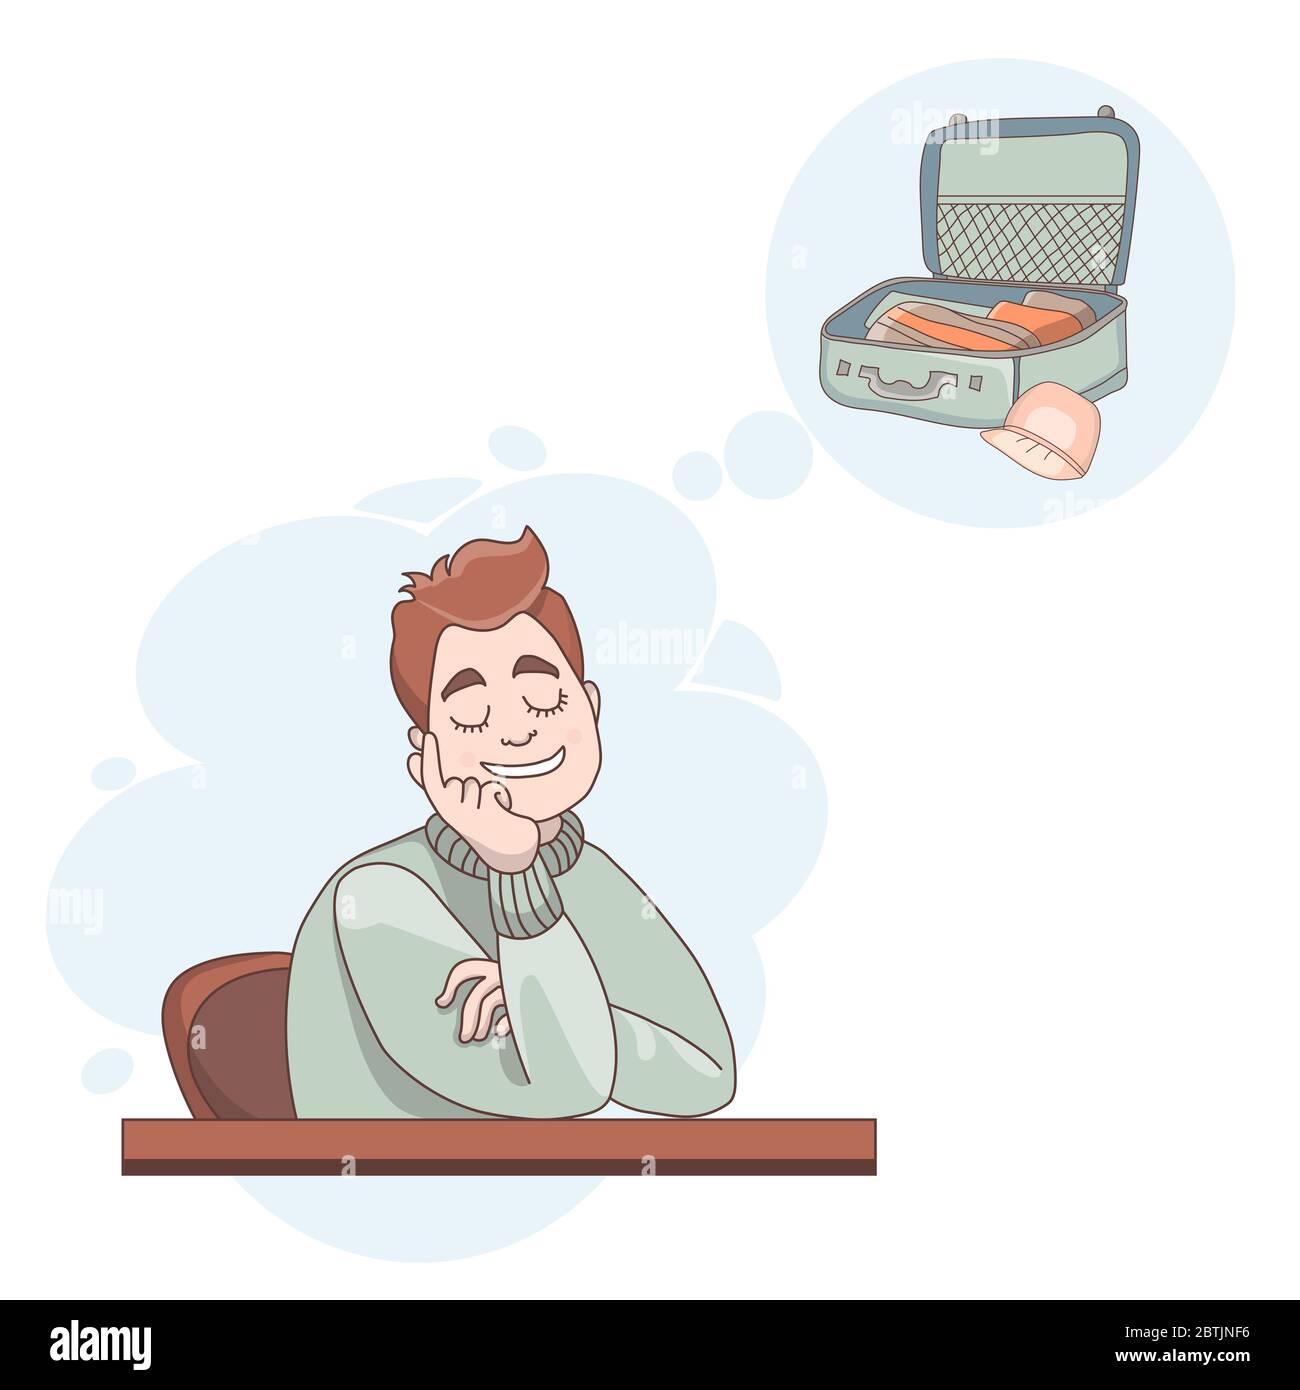 Vector illustration. The man sitting at the table closed his eyes and dreams. Above it is a picture of luggage and collecting things for travel. Stock Vector